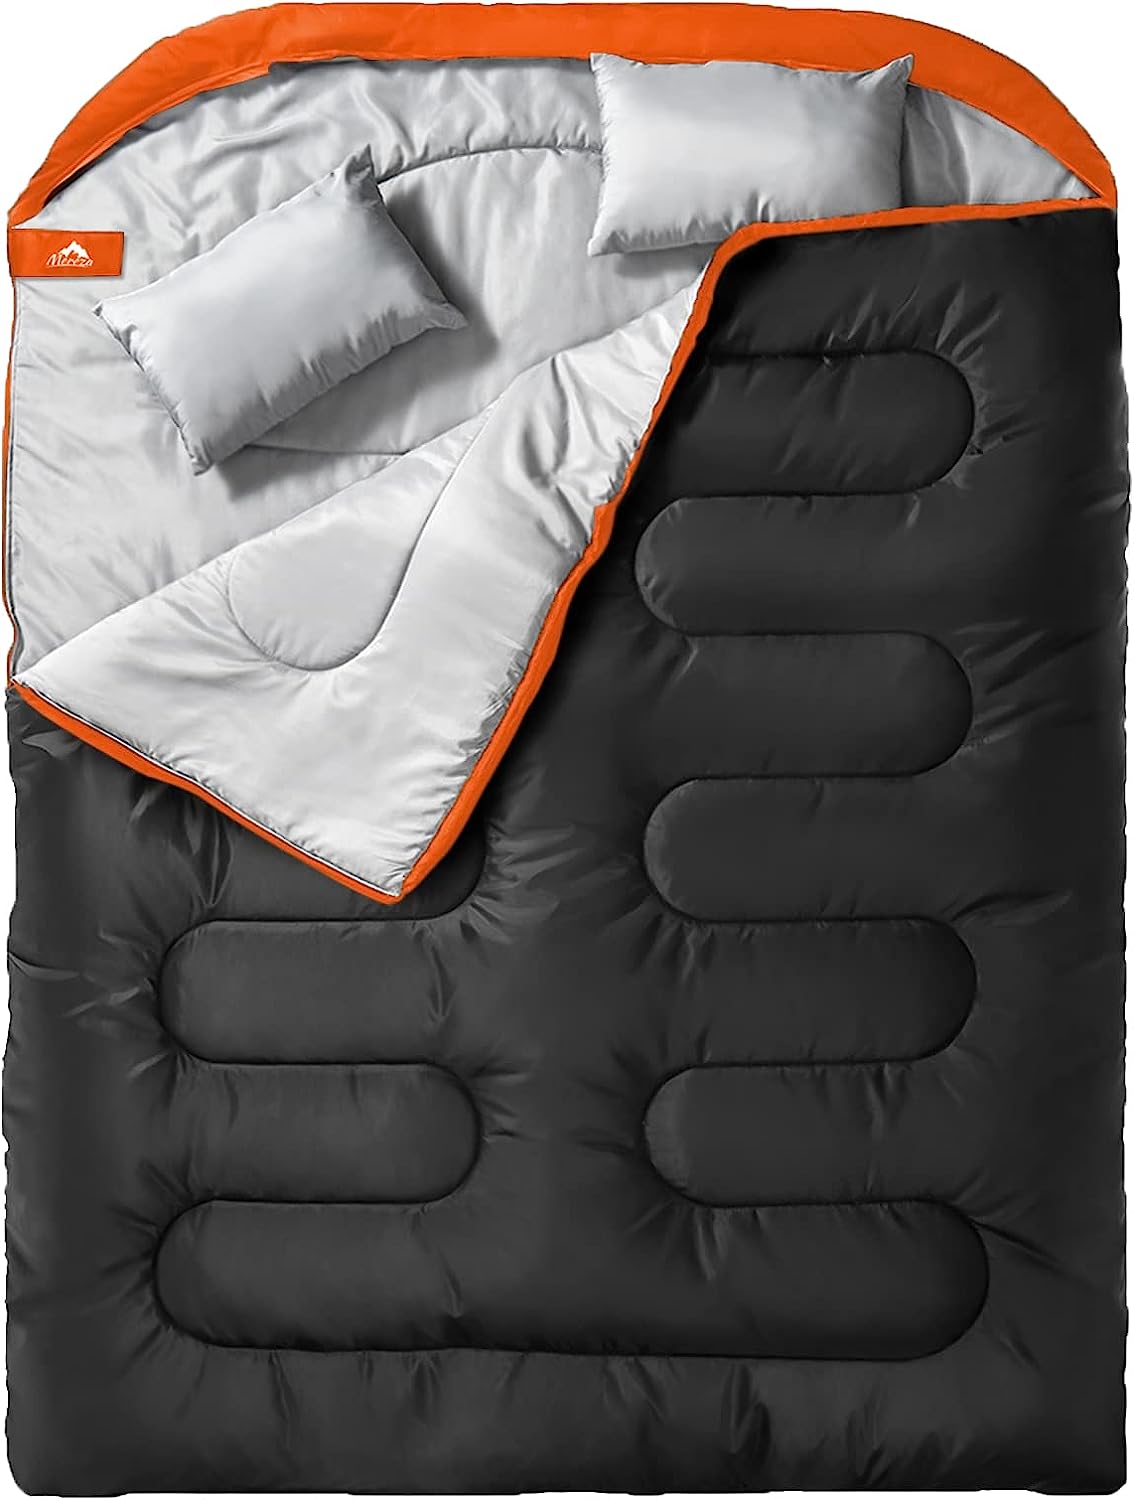 Double Sleeping Bag for Adults with Pillow, Two Person Sleeping Bag for All Season Camping, Backpacking, or Hiking for Adults or Teens Queen Size XL - Delicate Leather